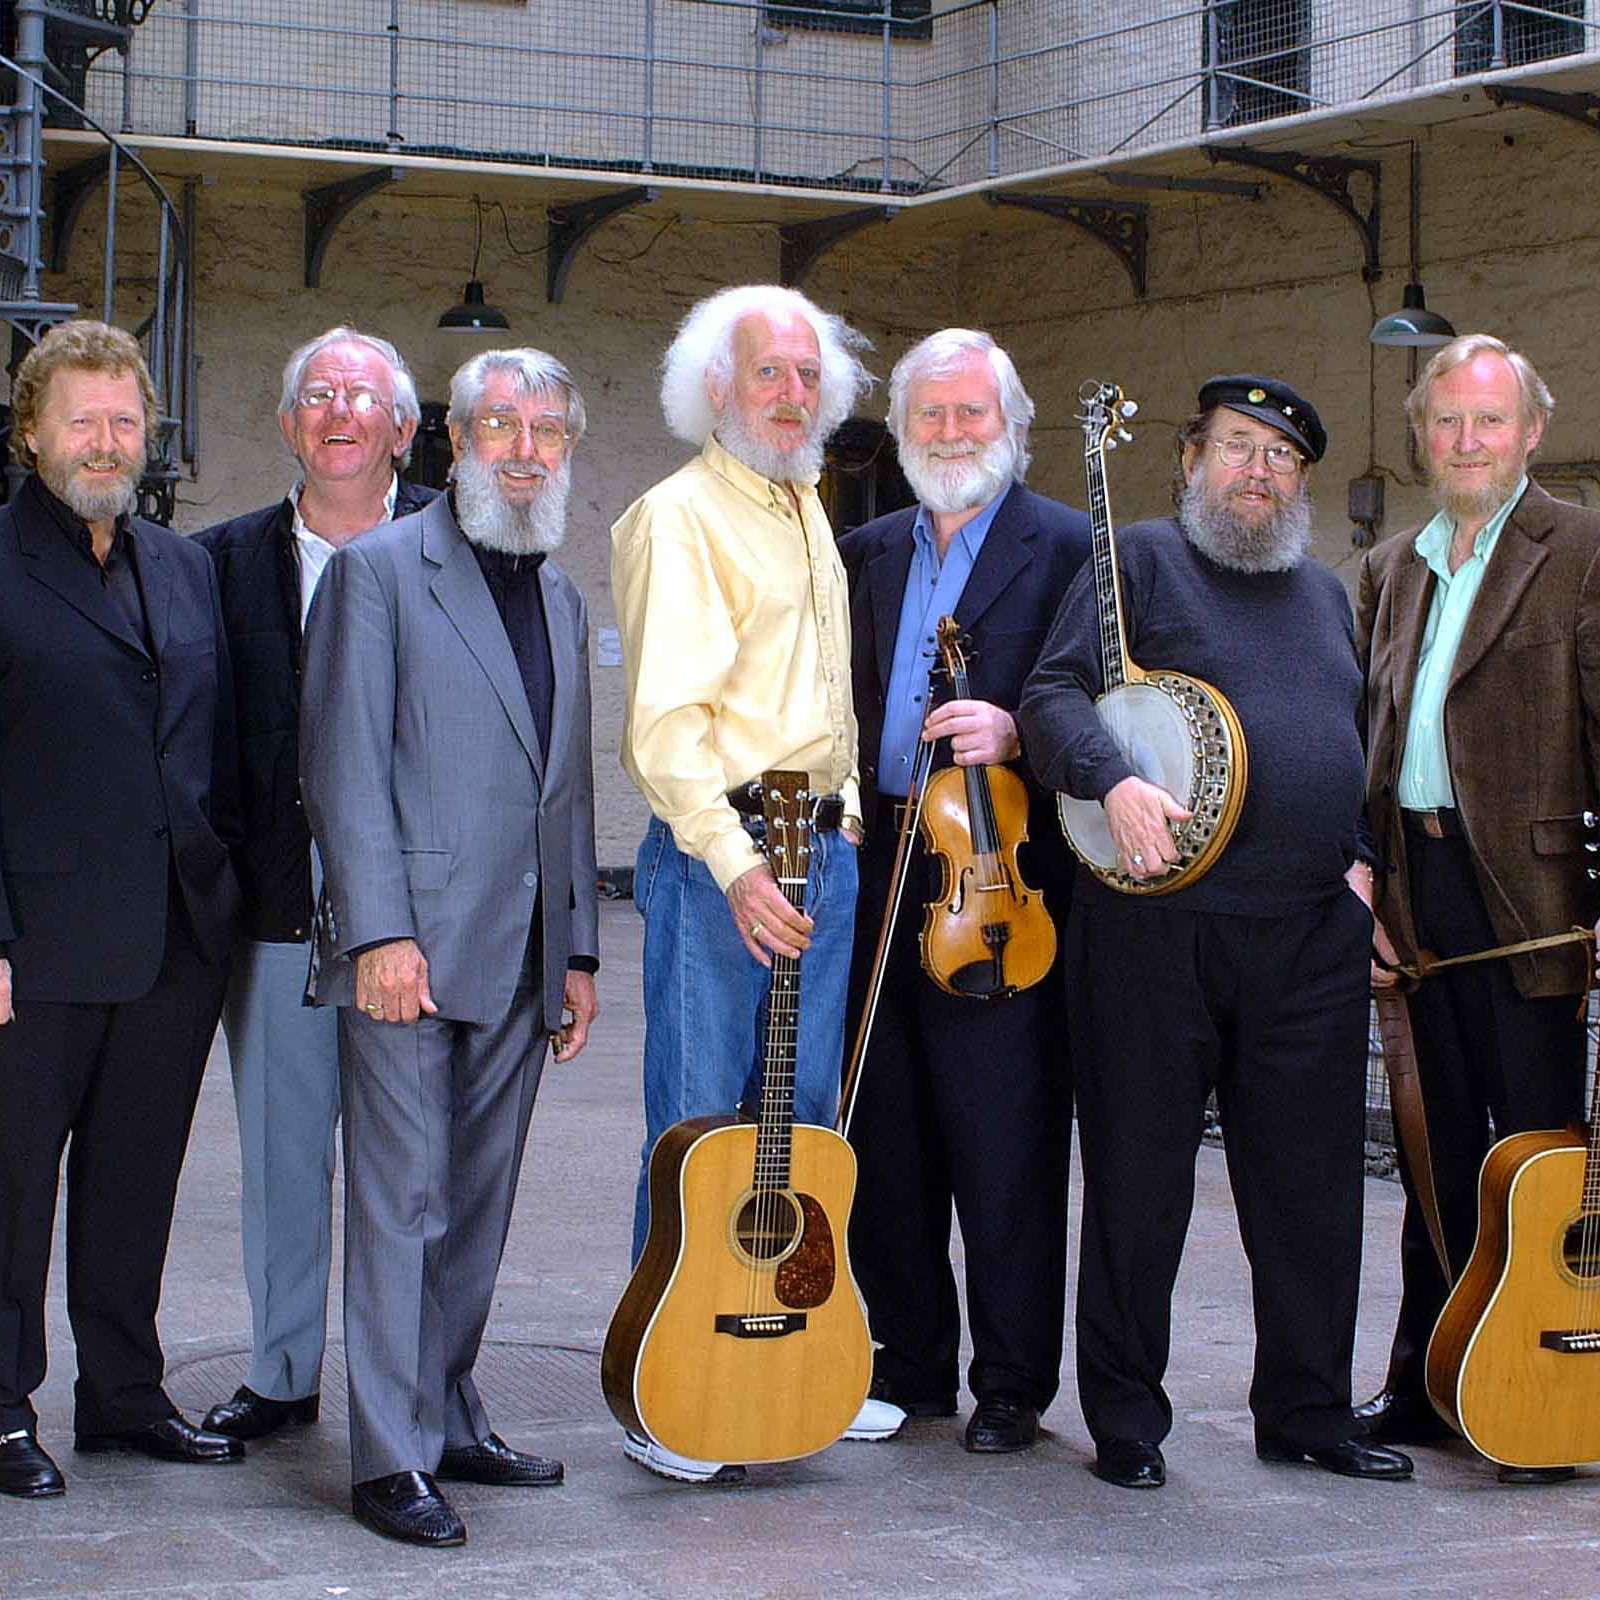 Buy The Dubliners tickets, The Dubliners tour details, The Dubliners